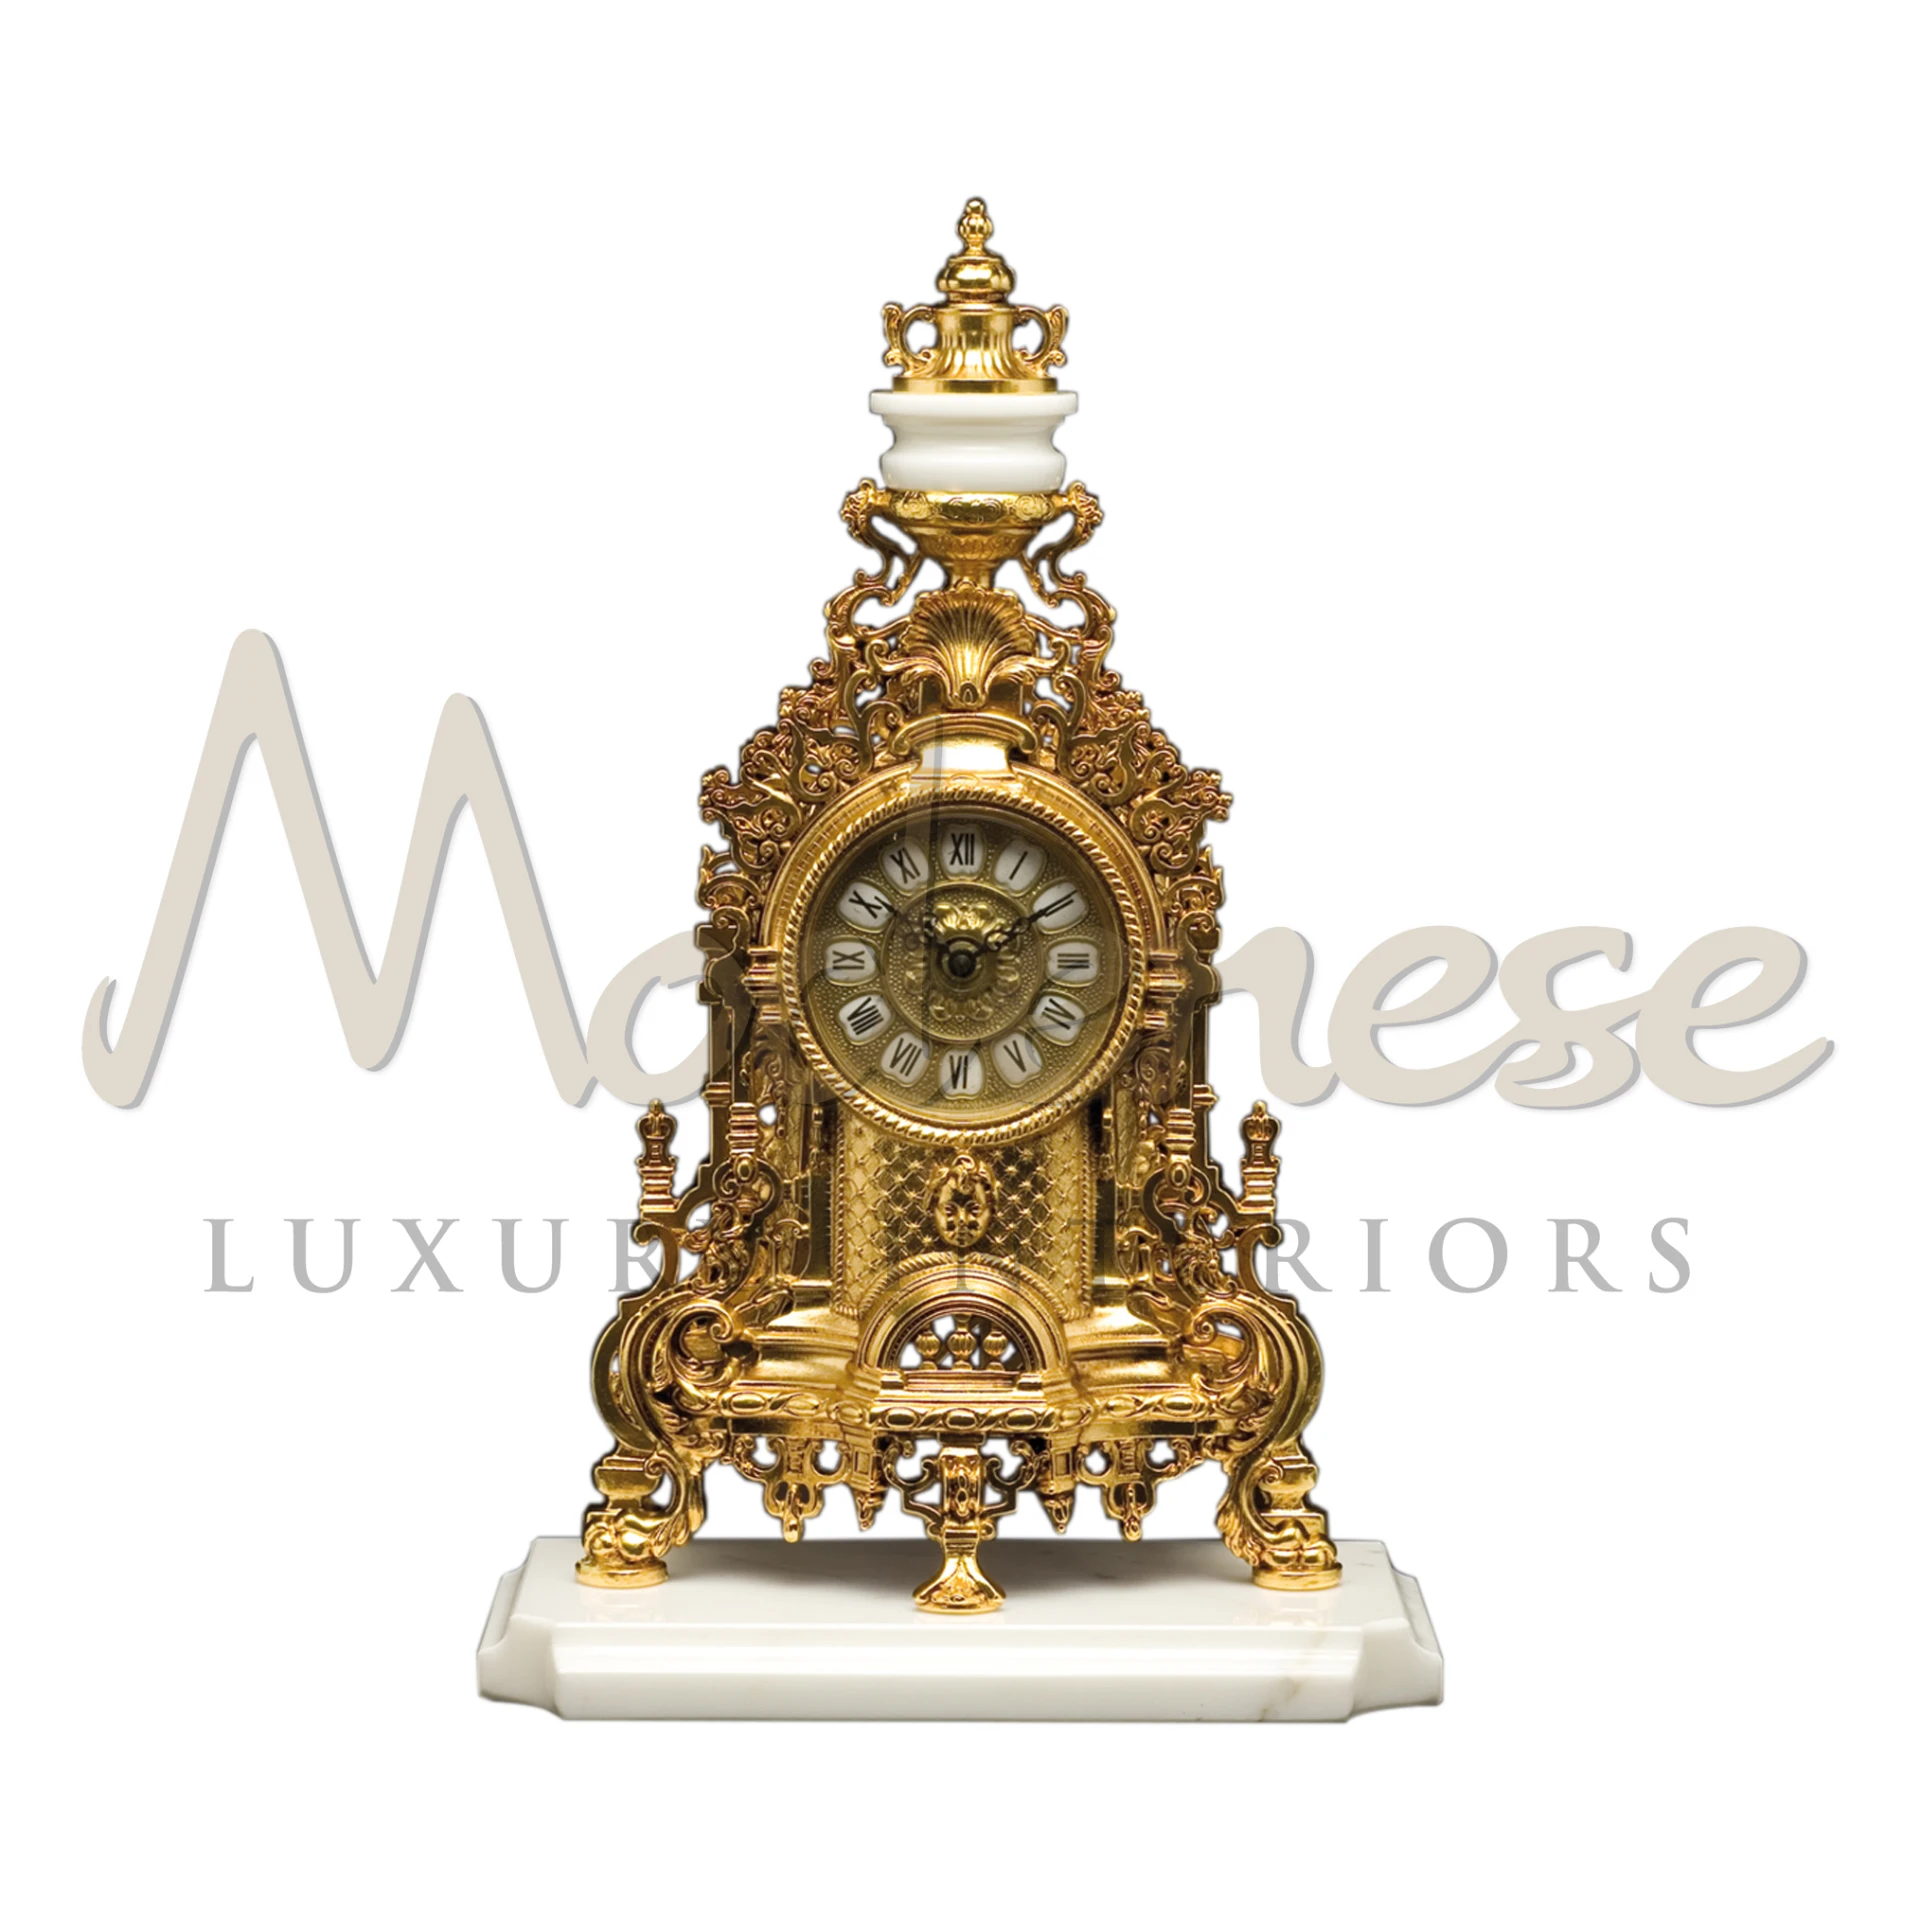 Modenese's traditional handcrafted Elite Clock on Bianco Carrara marble base
